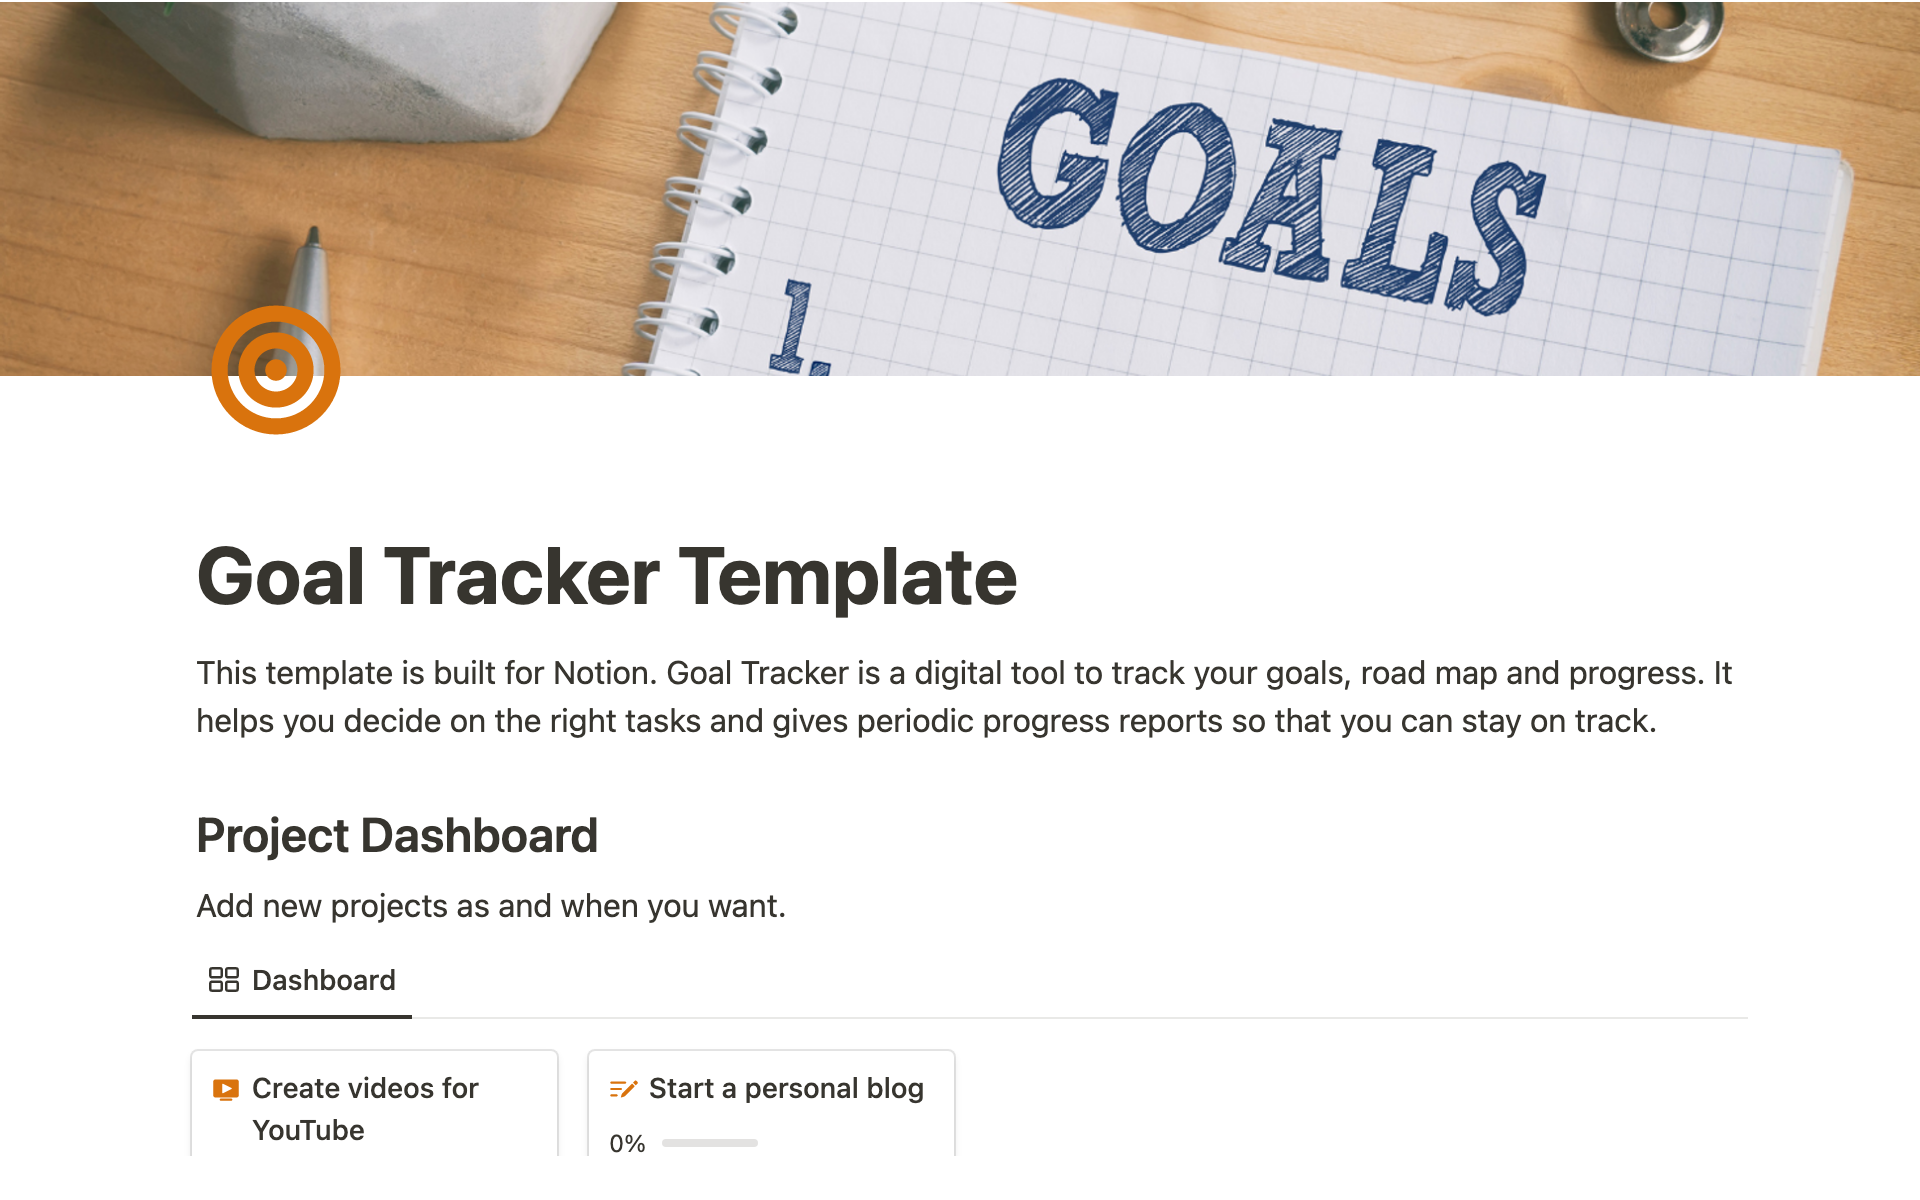 A digital tool to track your goals, road map and progress. It helps you decide on the right tasks and gives periodic progress reports so that you can stay on track.